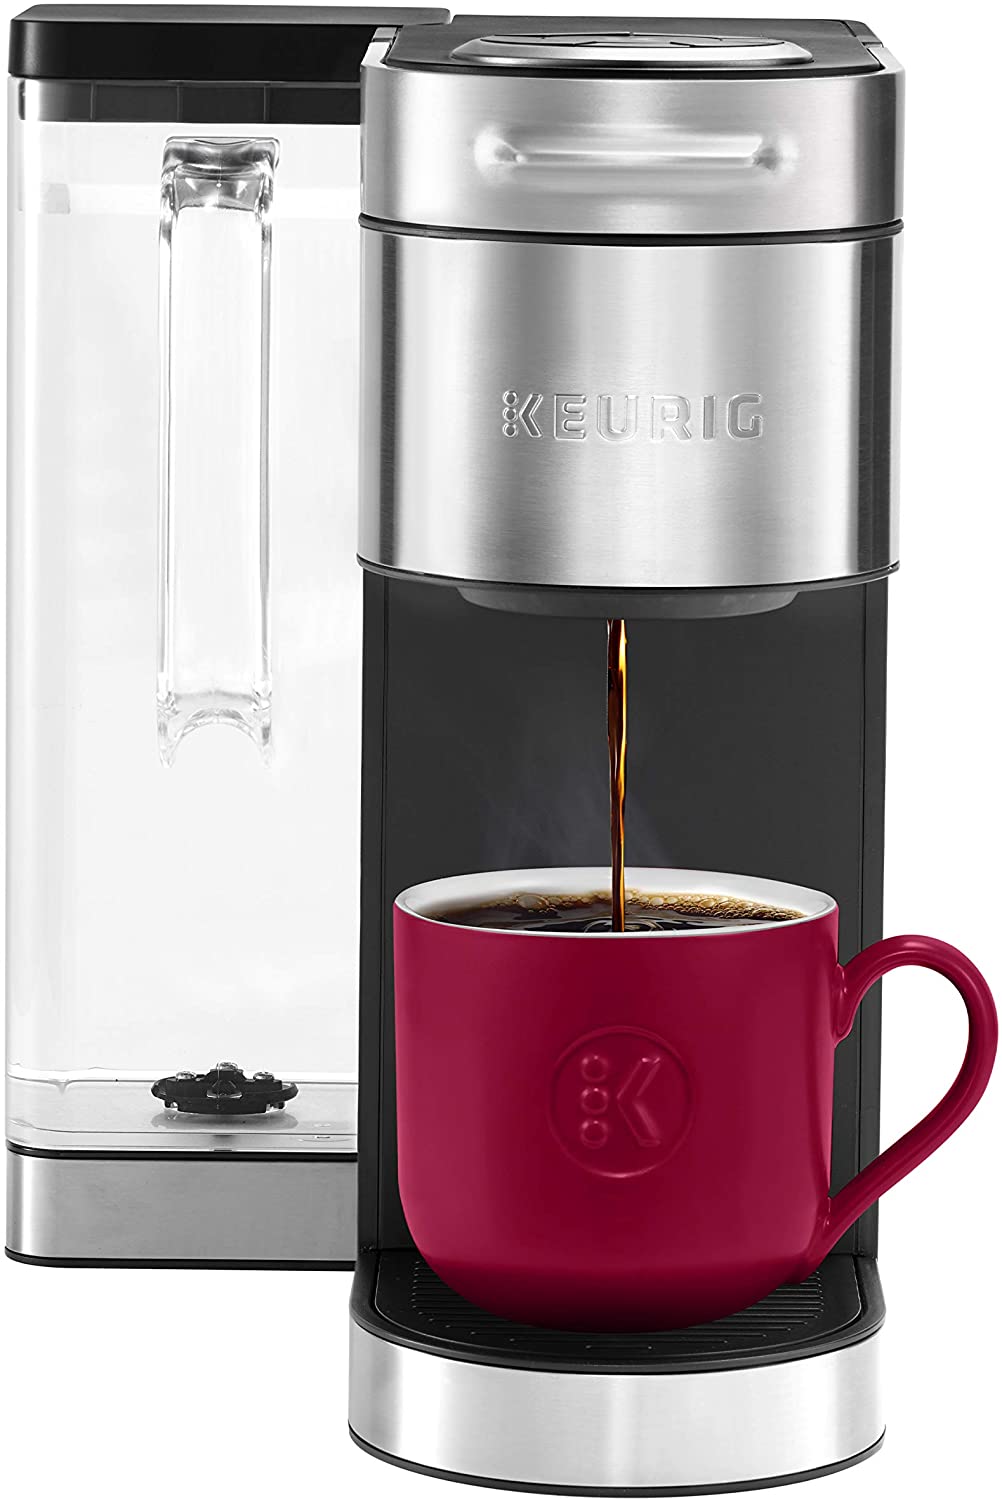 The Keurig K-Supreme comes with an iced coffee button